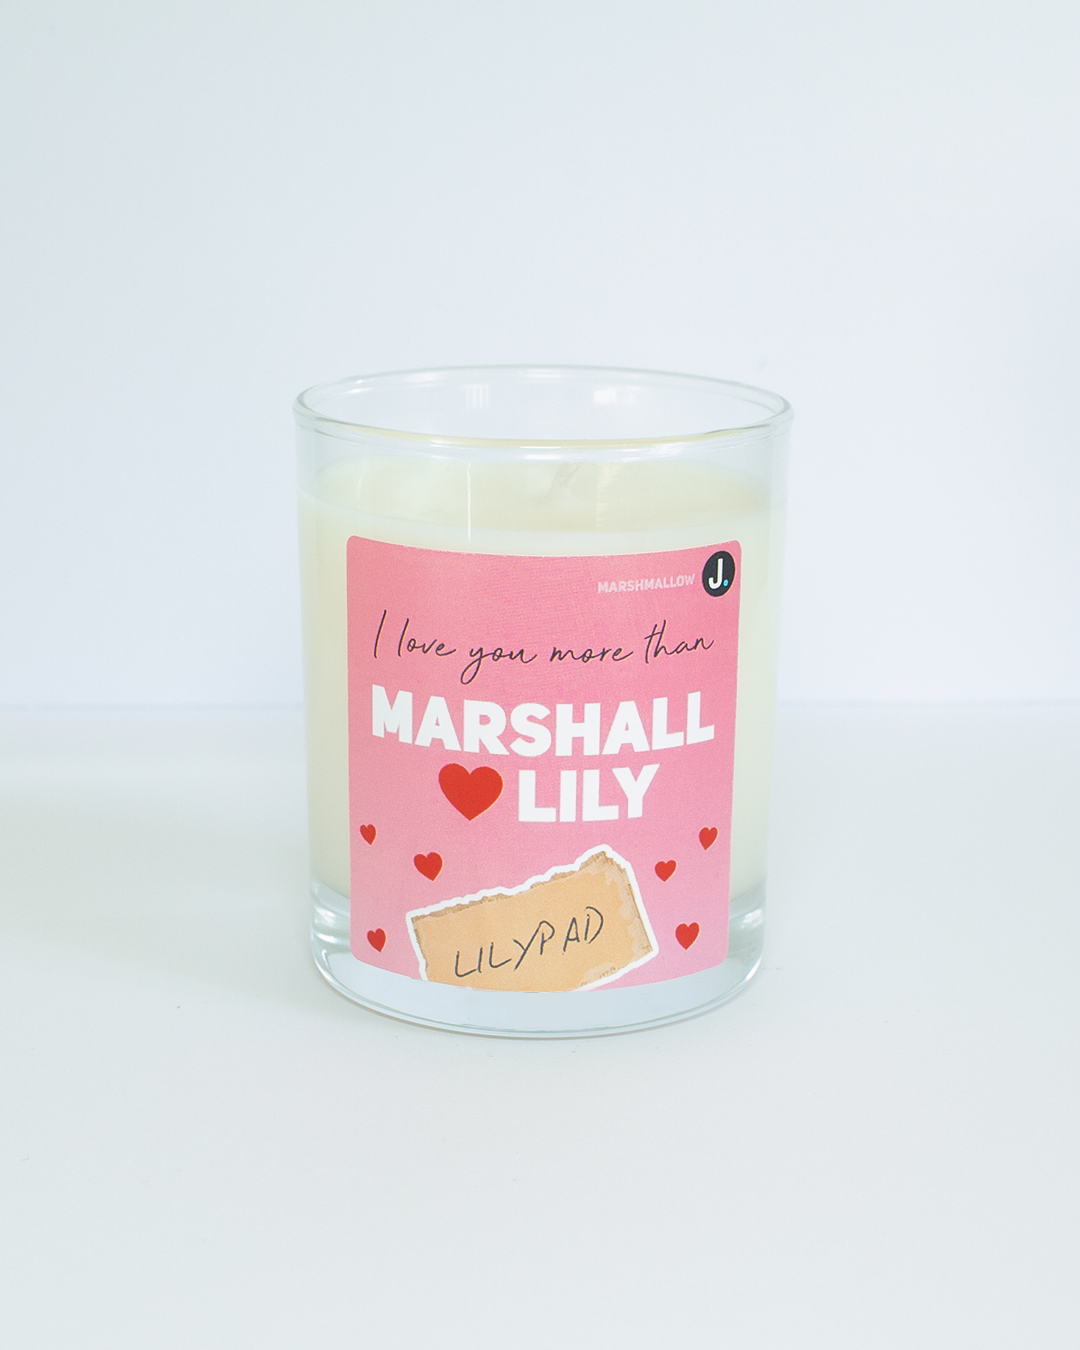 How I Met Your Mother Inspired Candle - Marshall & Lily (Marshmallow) How I Met Your Mother Inspired Candle